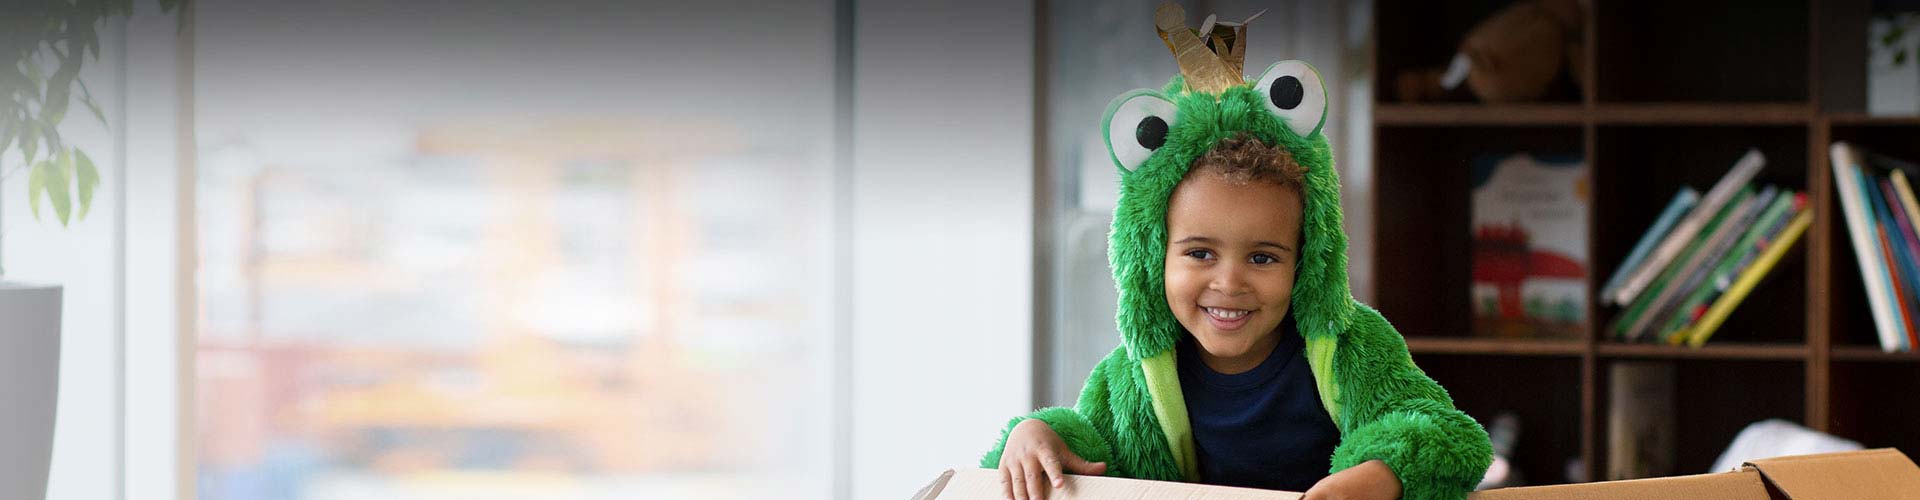 Child wearing Opn Play hearing aids in a costume